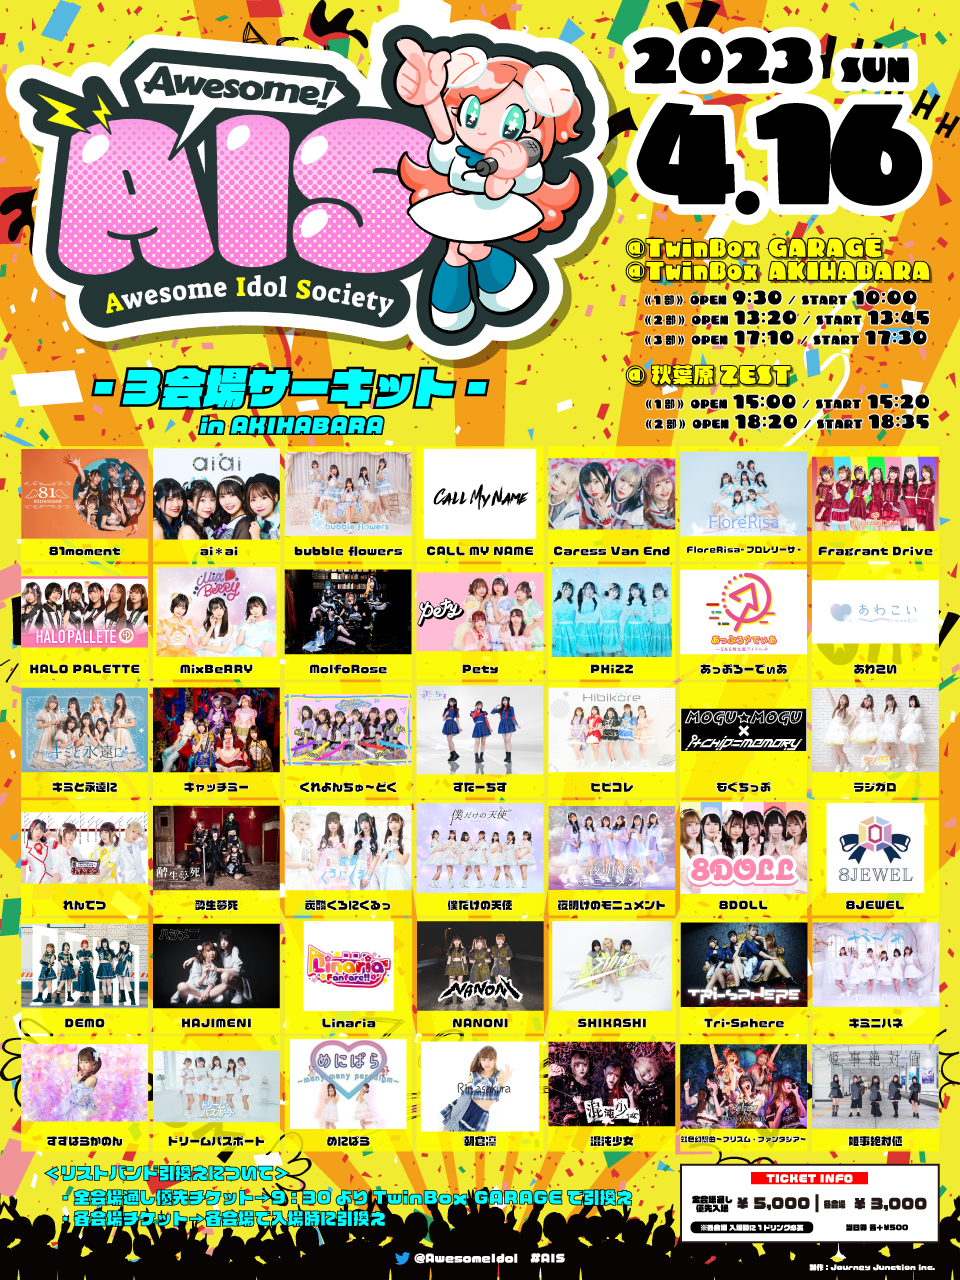 Awesome Idol Society -3会場サーキット-